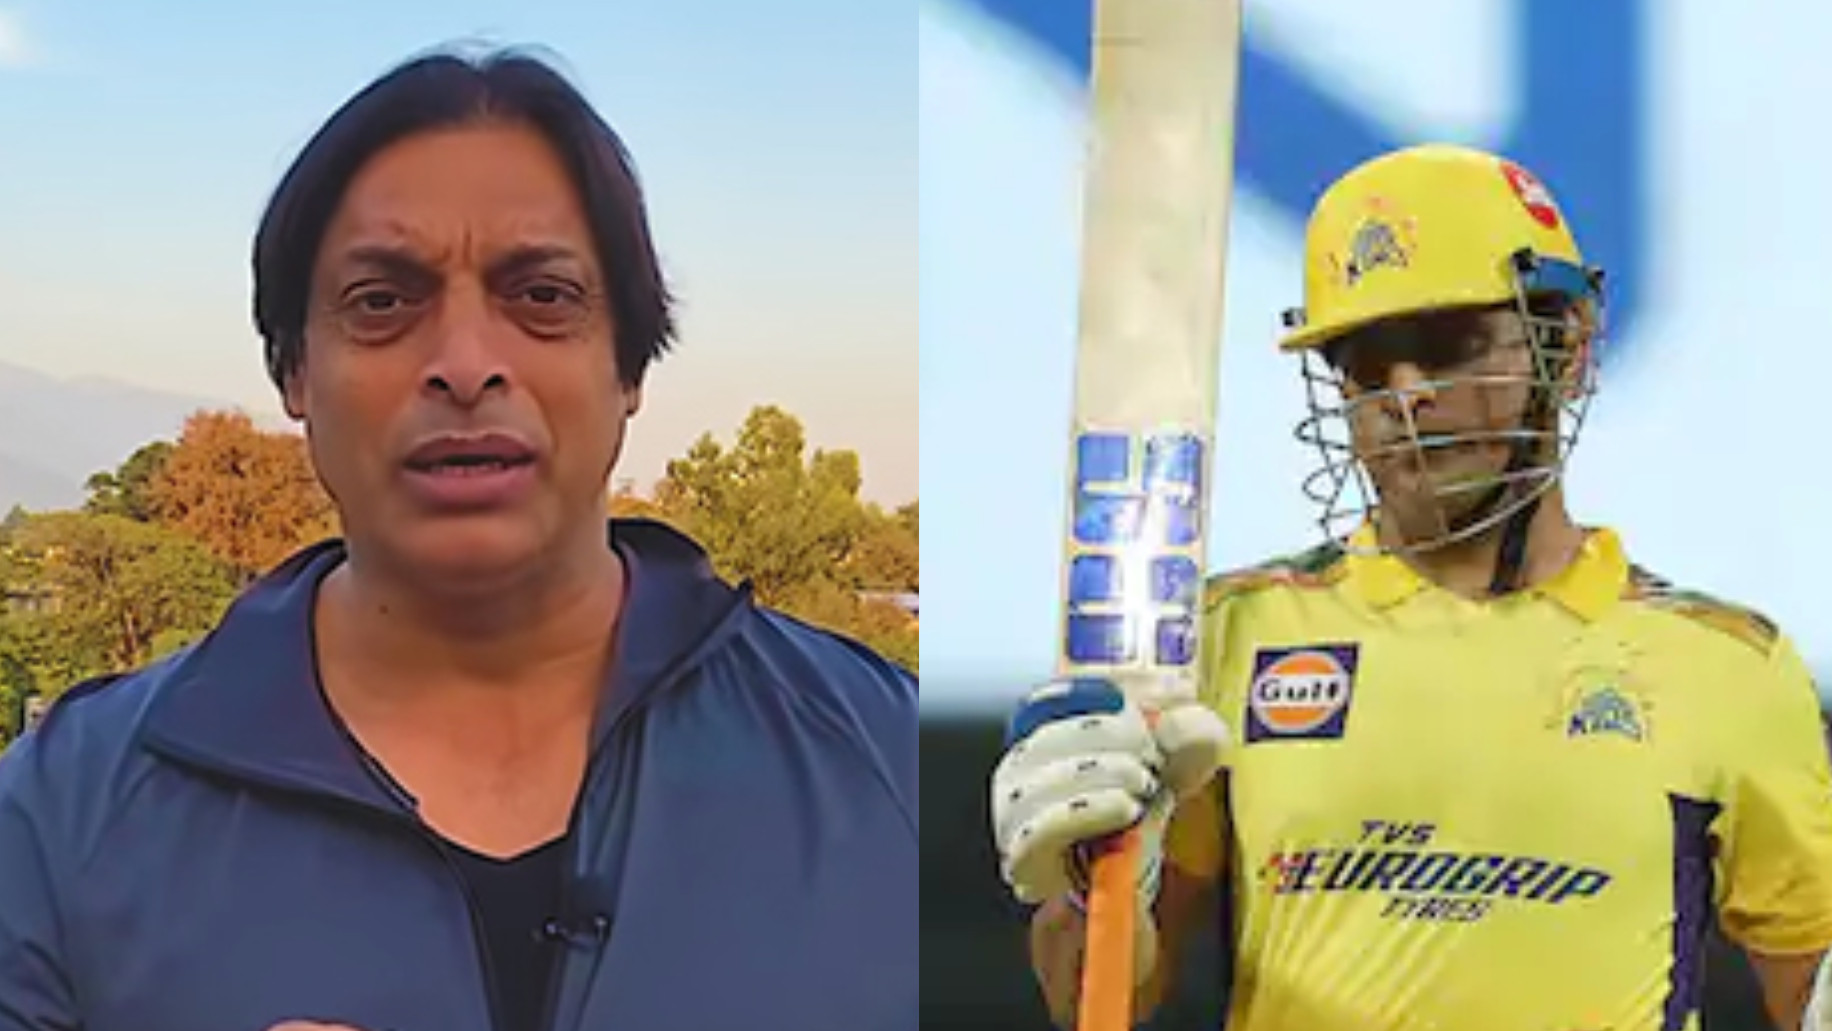 IPL 2022: “2 days before IPL, didn’t understand that”- Shoaib Akhtar on MS Dhoni quitting as CSK captain